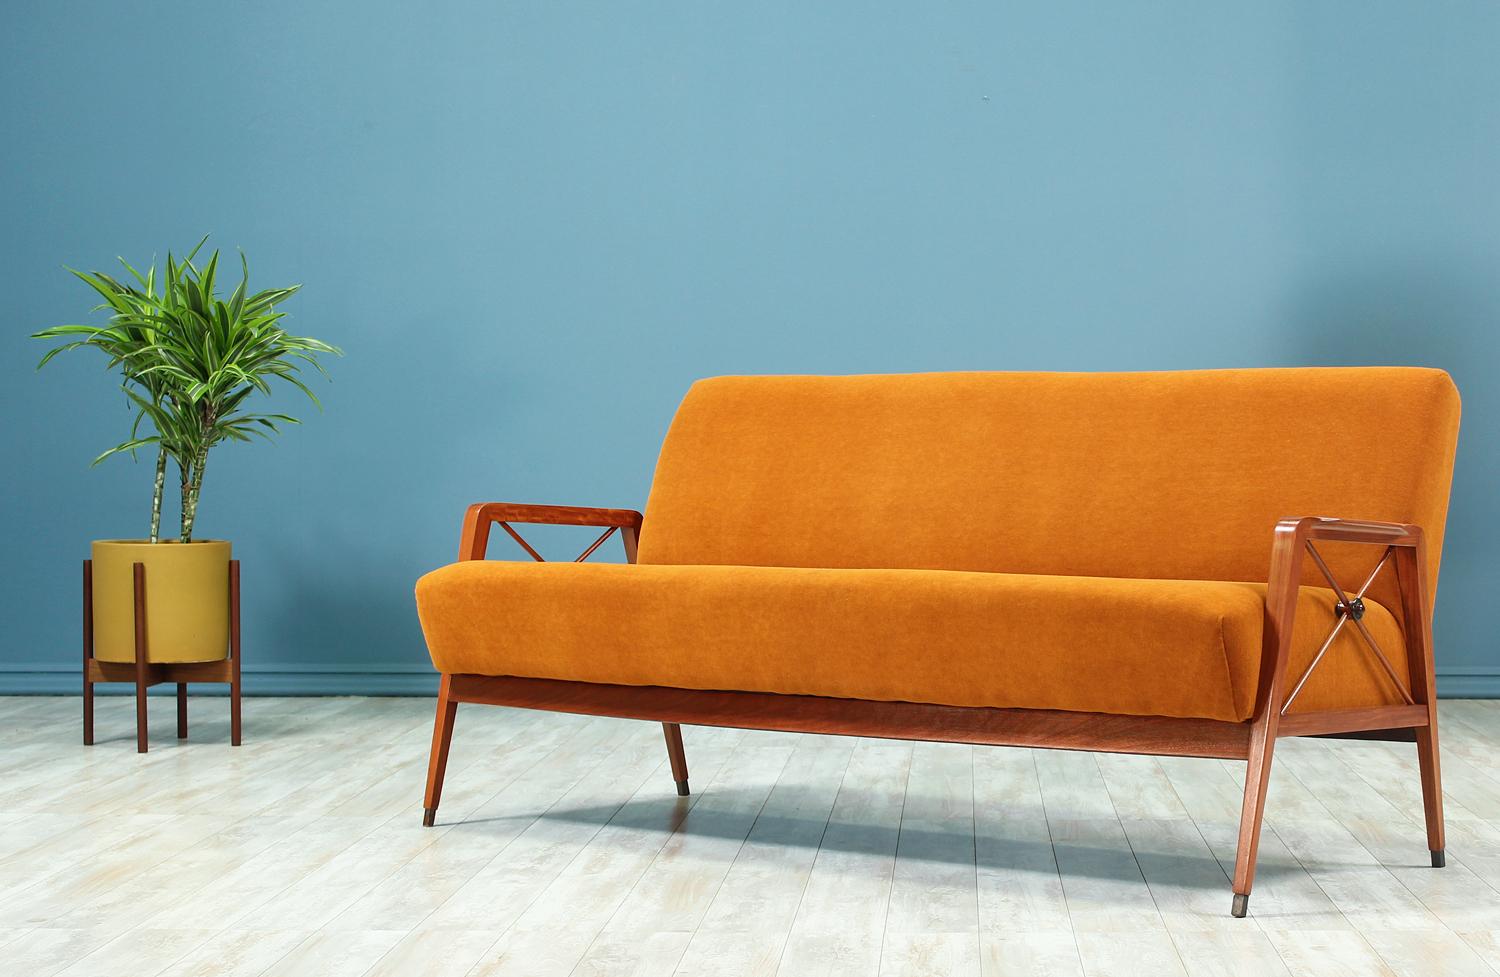 Sophisticated sofa manufactured by Cavallaro in Brazil circa 1960’s. This sofa features a frame made with exotic Caviuna wood and reupholstered in a persimmon colored mohair fabric. This elegant model features bronze feet tips and bronze medallions